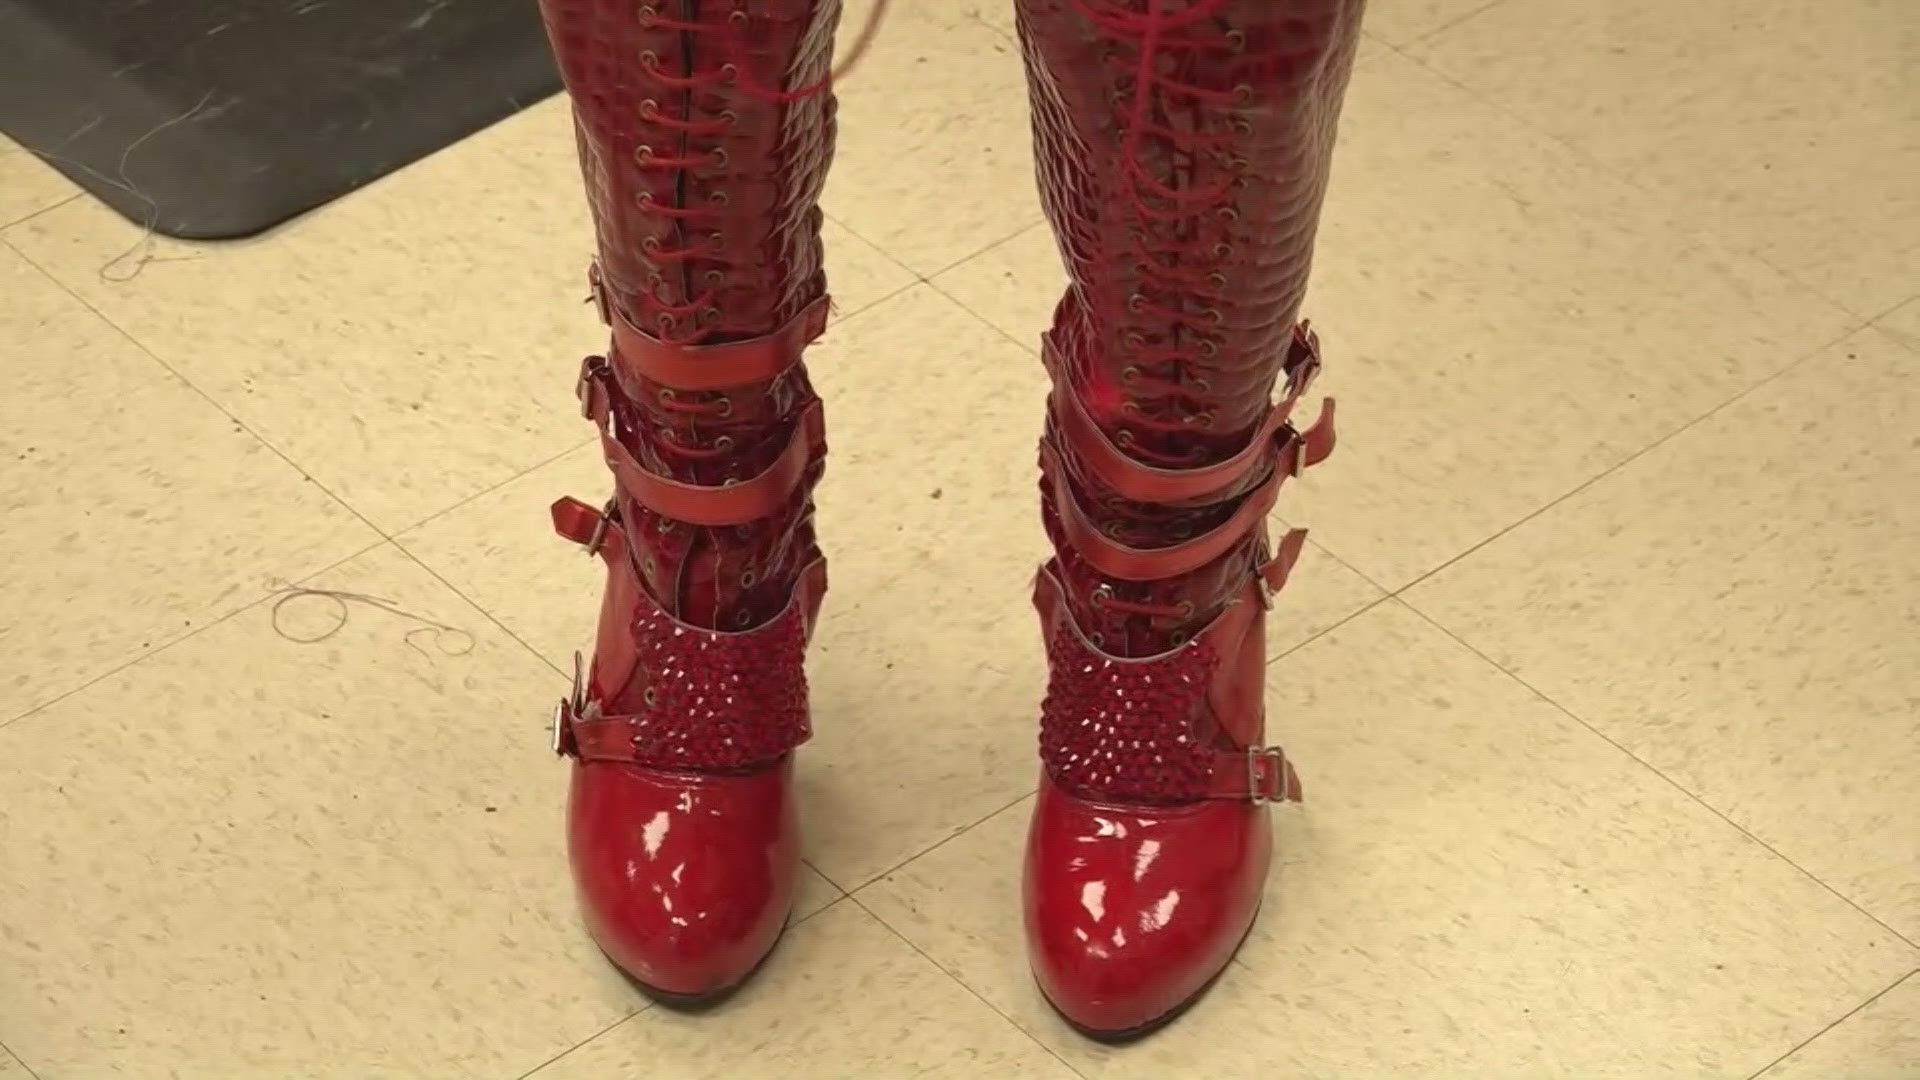 The cast of Kinky Boots at the Clarence Brown Theatre is getting ready for opening night of the popular Broadway show.